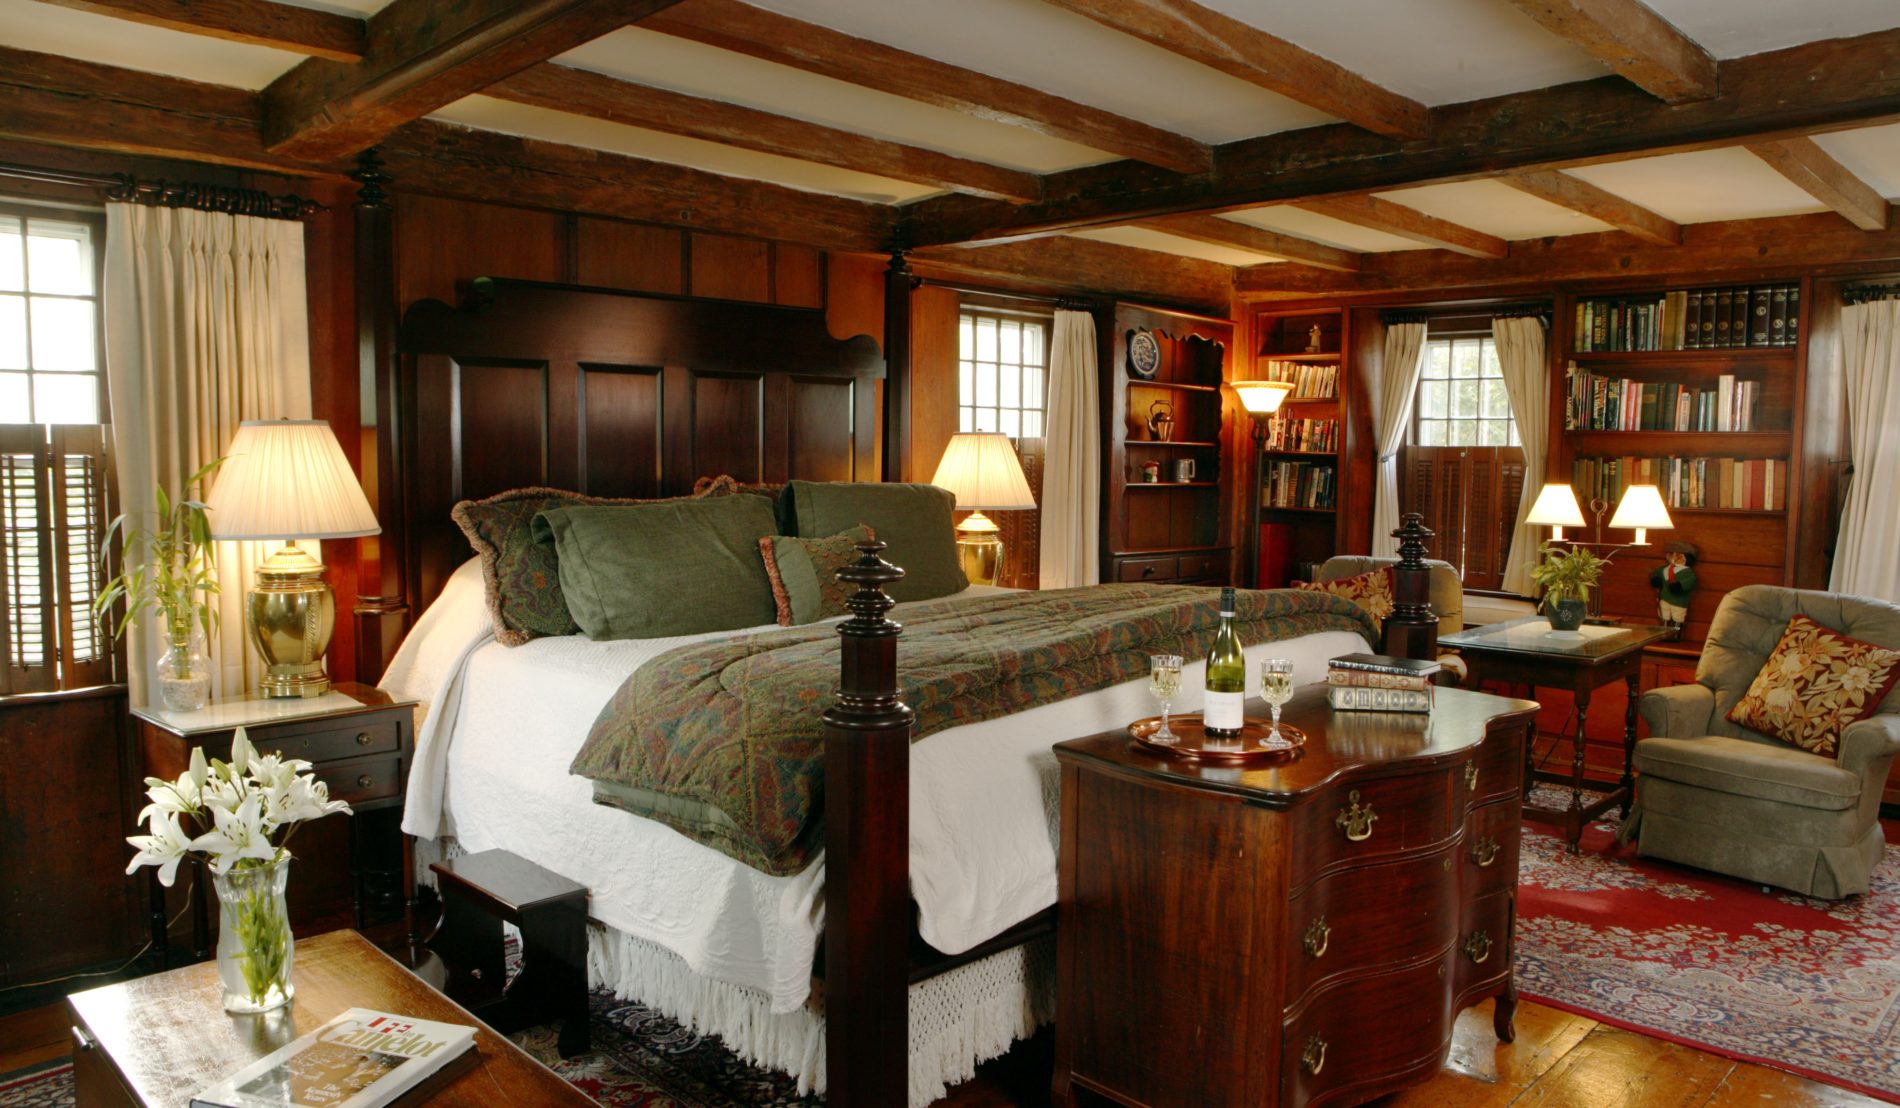 Hiram Harding cottage with ceiling beams, wide plank wood floor, four poster bed, several windows, cozy sitting chairs and bookshelves